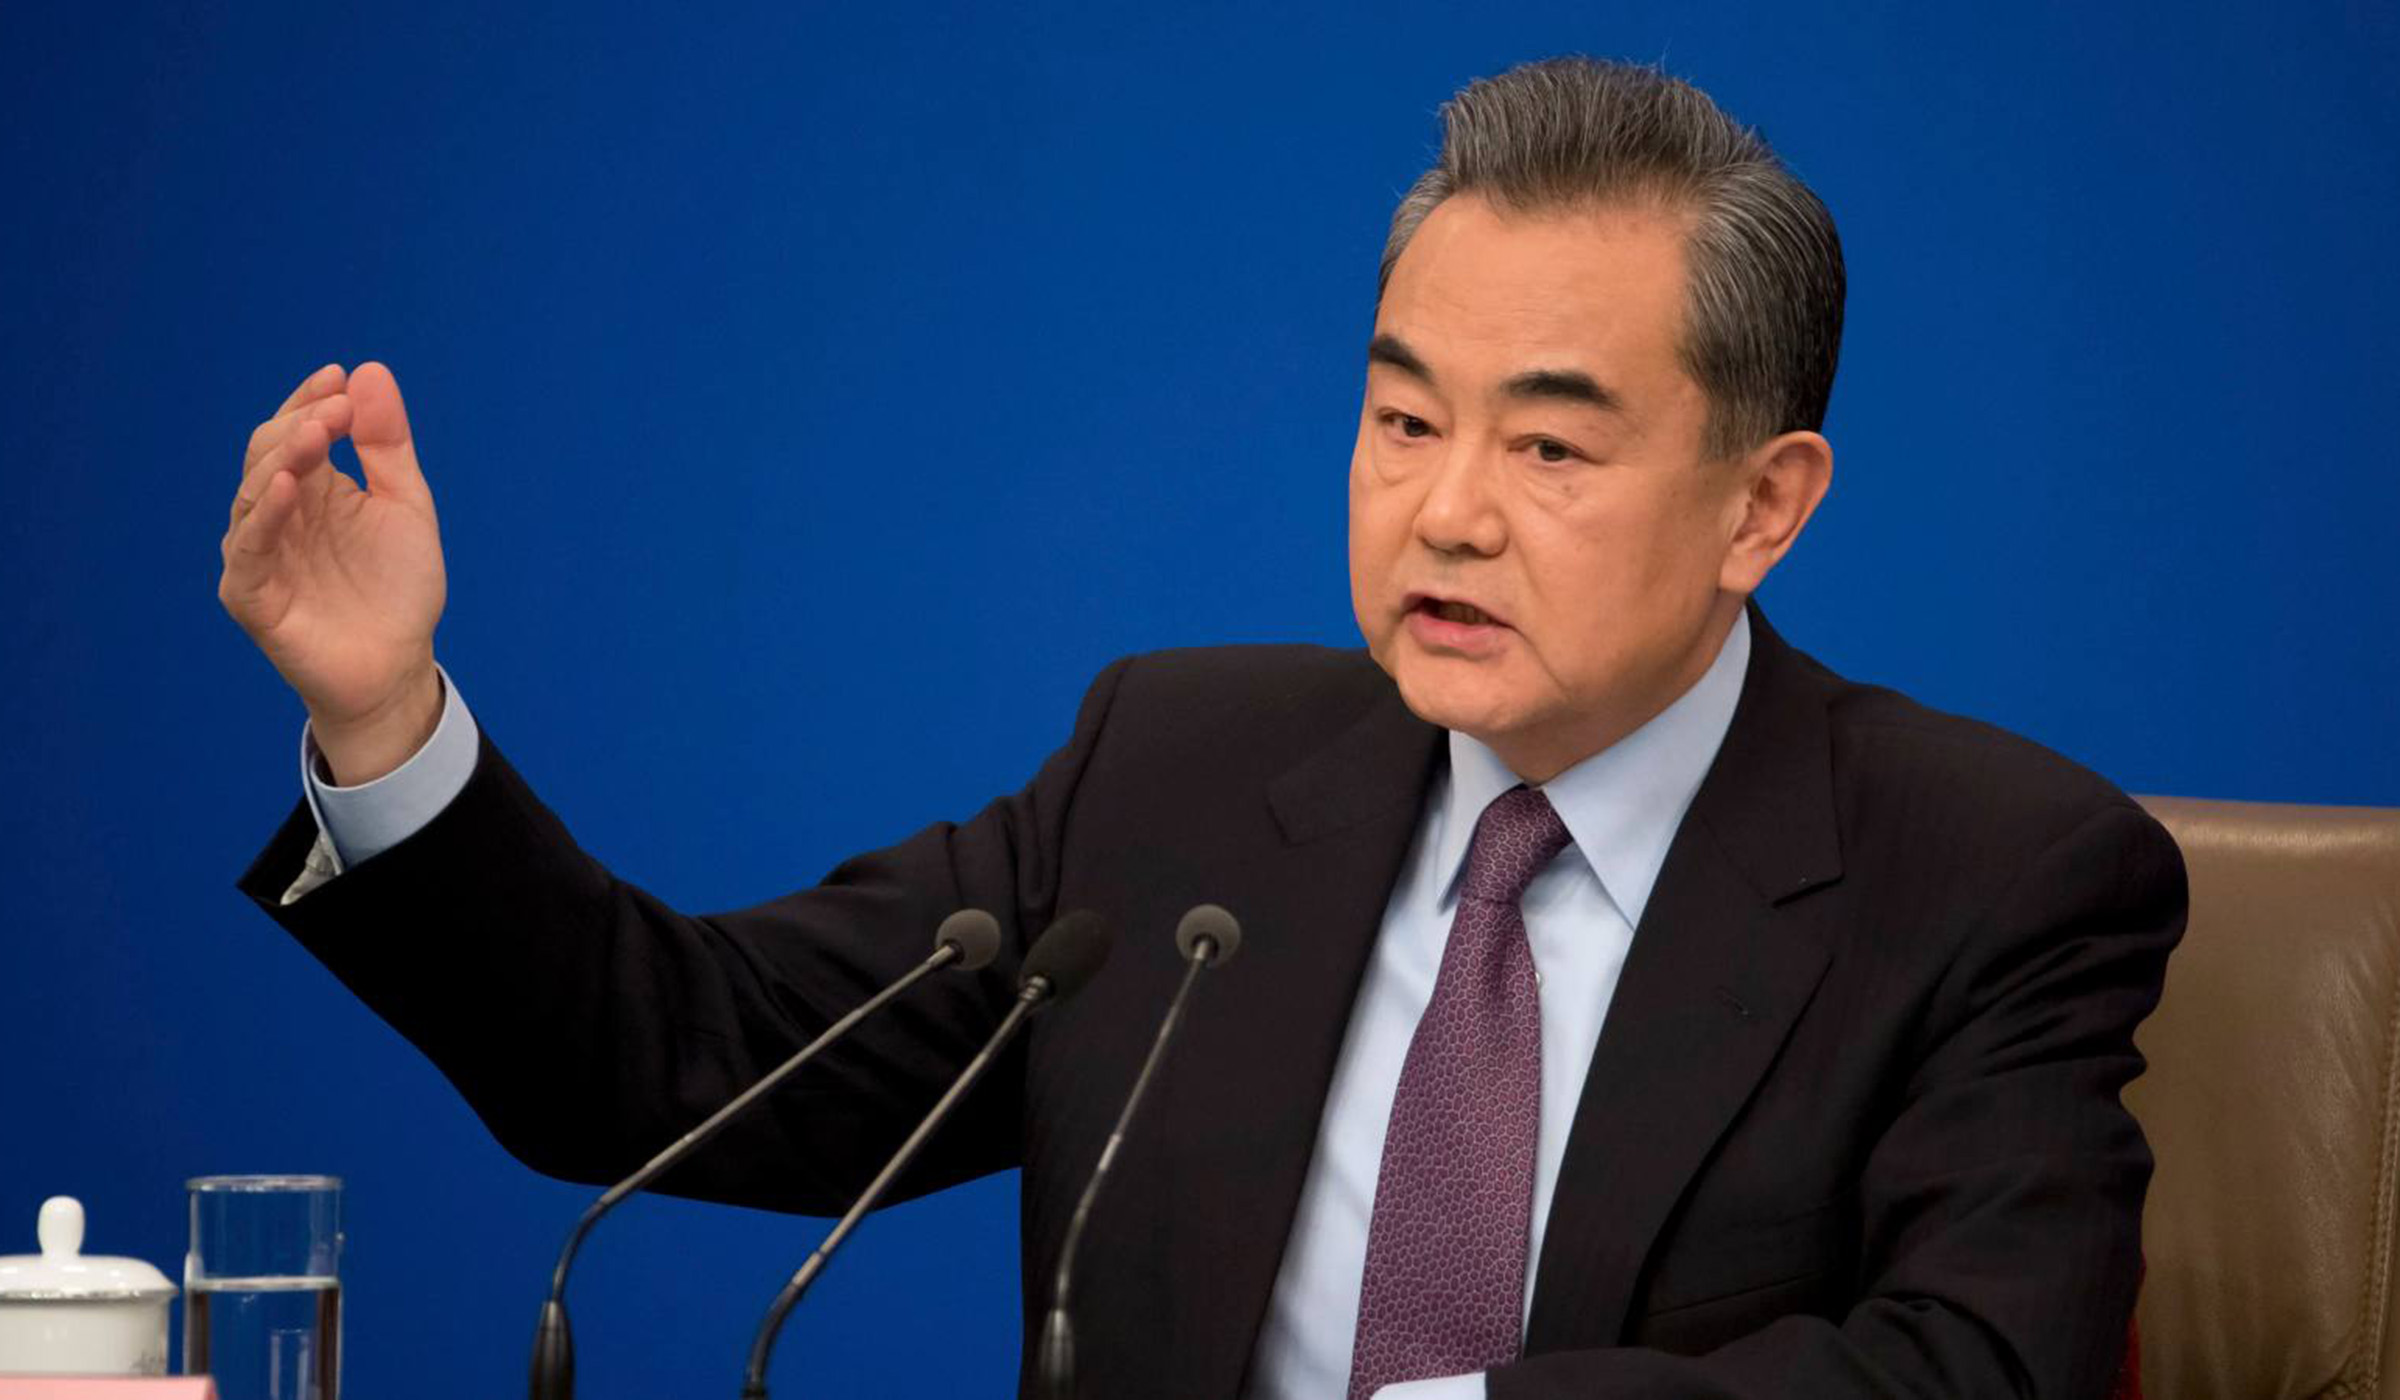 Wang Yi, Chinese State Councilor and Foreign Minister, briefs media on Friday in Beijing. Net photo.